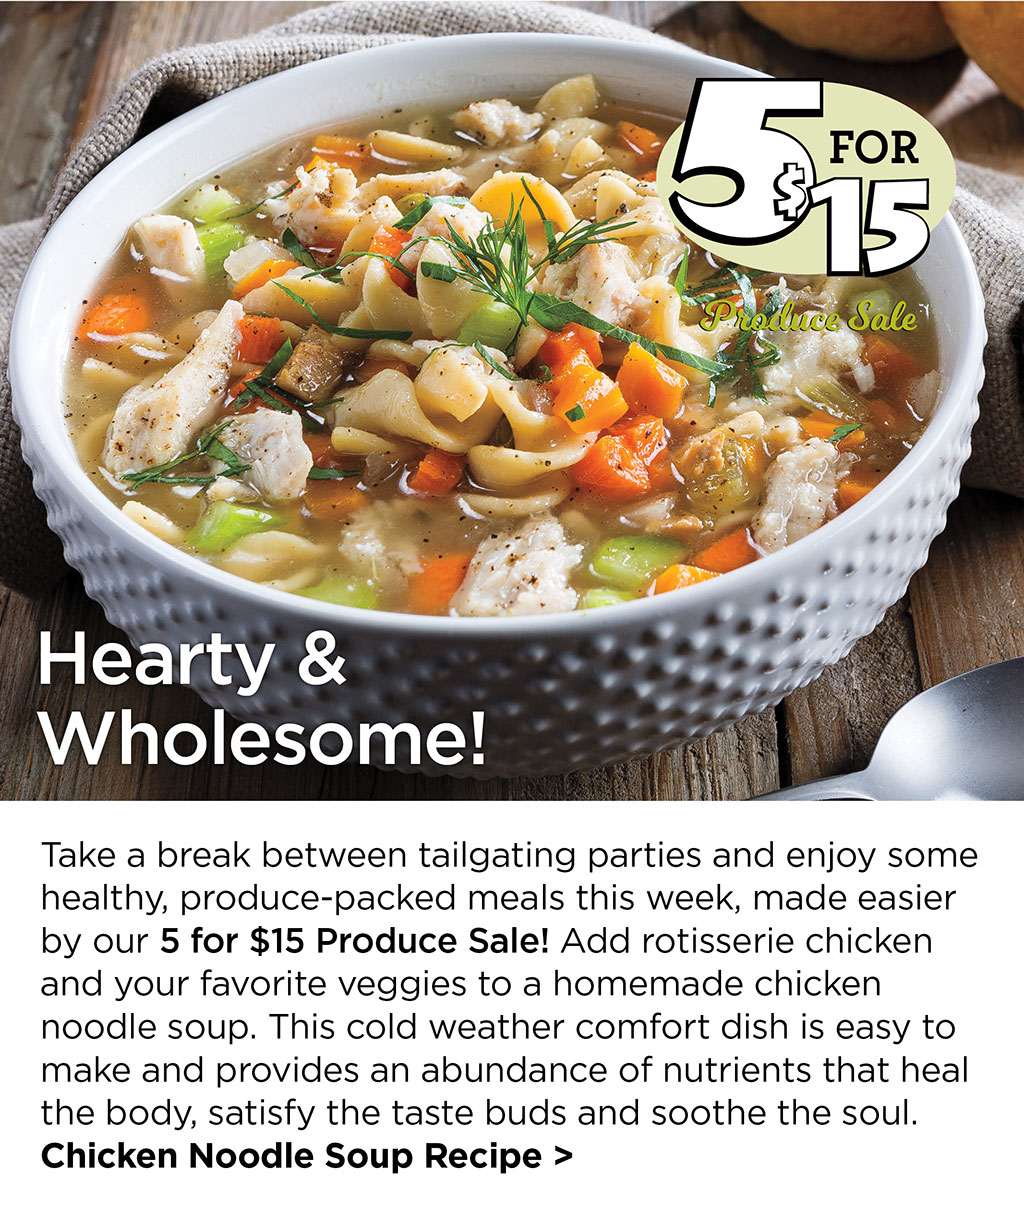 Hearty & Wholesome! - Take a break between tailgating parties and enjoy some healthy, produce-packed meals this week, made easier by our 5 for $15 Produce Sale! Add rotisserie chicken and your favorite veggies to a homemade chicken noodle soup. This cold weather comfort dish is easy to make and provides an abundance of nutrients that heal the body, satisfy the taste buds and soothe the soul. Chicken Noodle Soup Recipe >